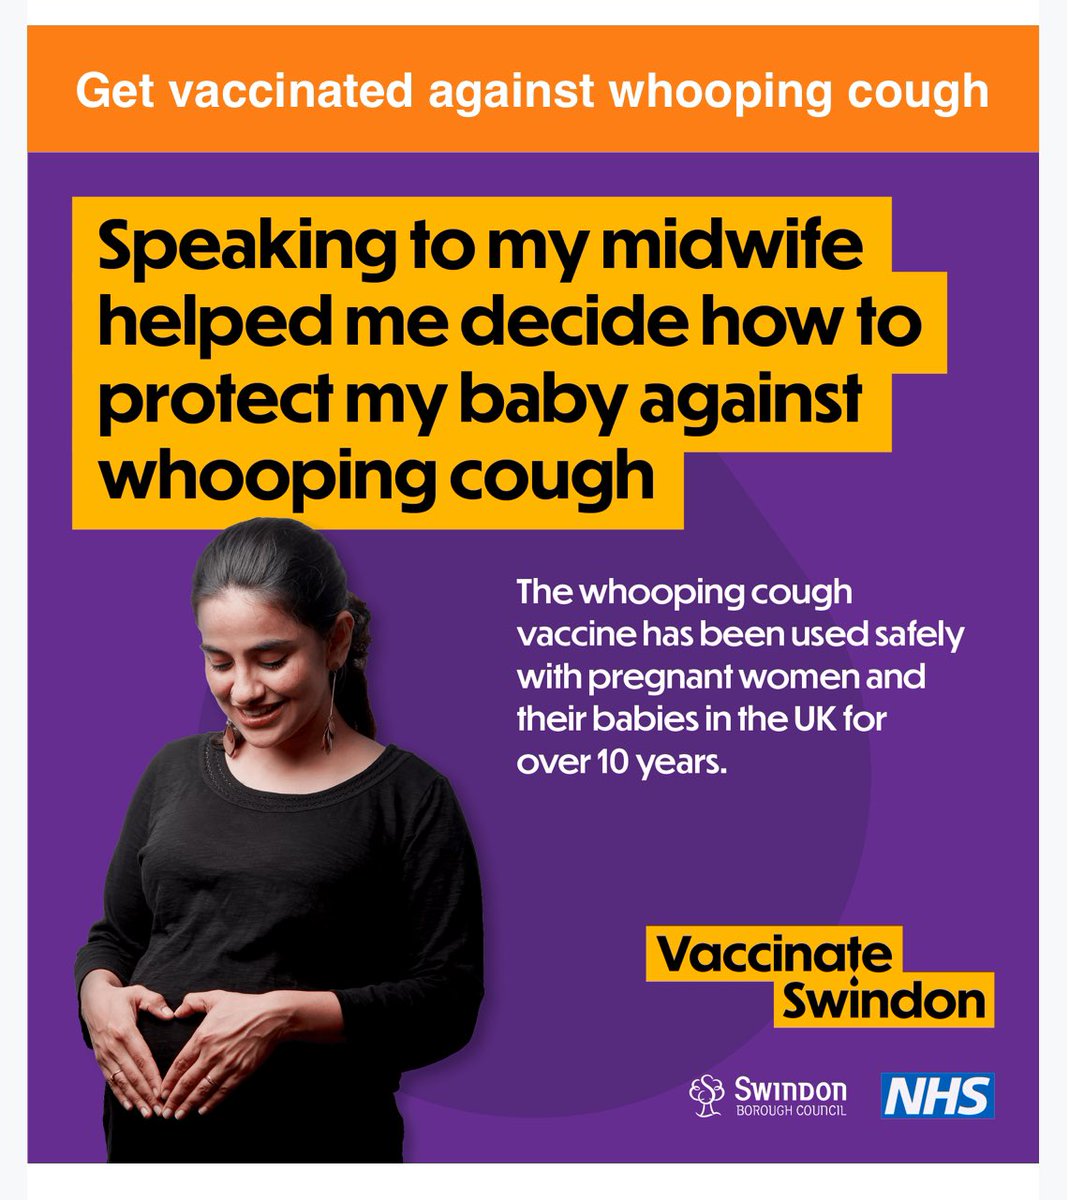 We're reminding #swindon mums-to-be to get protected against whooping cough - ideally between 16 and 32 weeks - so that their young baby has protection from birth against this serious disease and to ask their midwife if they’re unsure about receiving the vaccination.